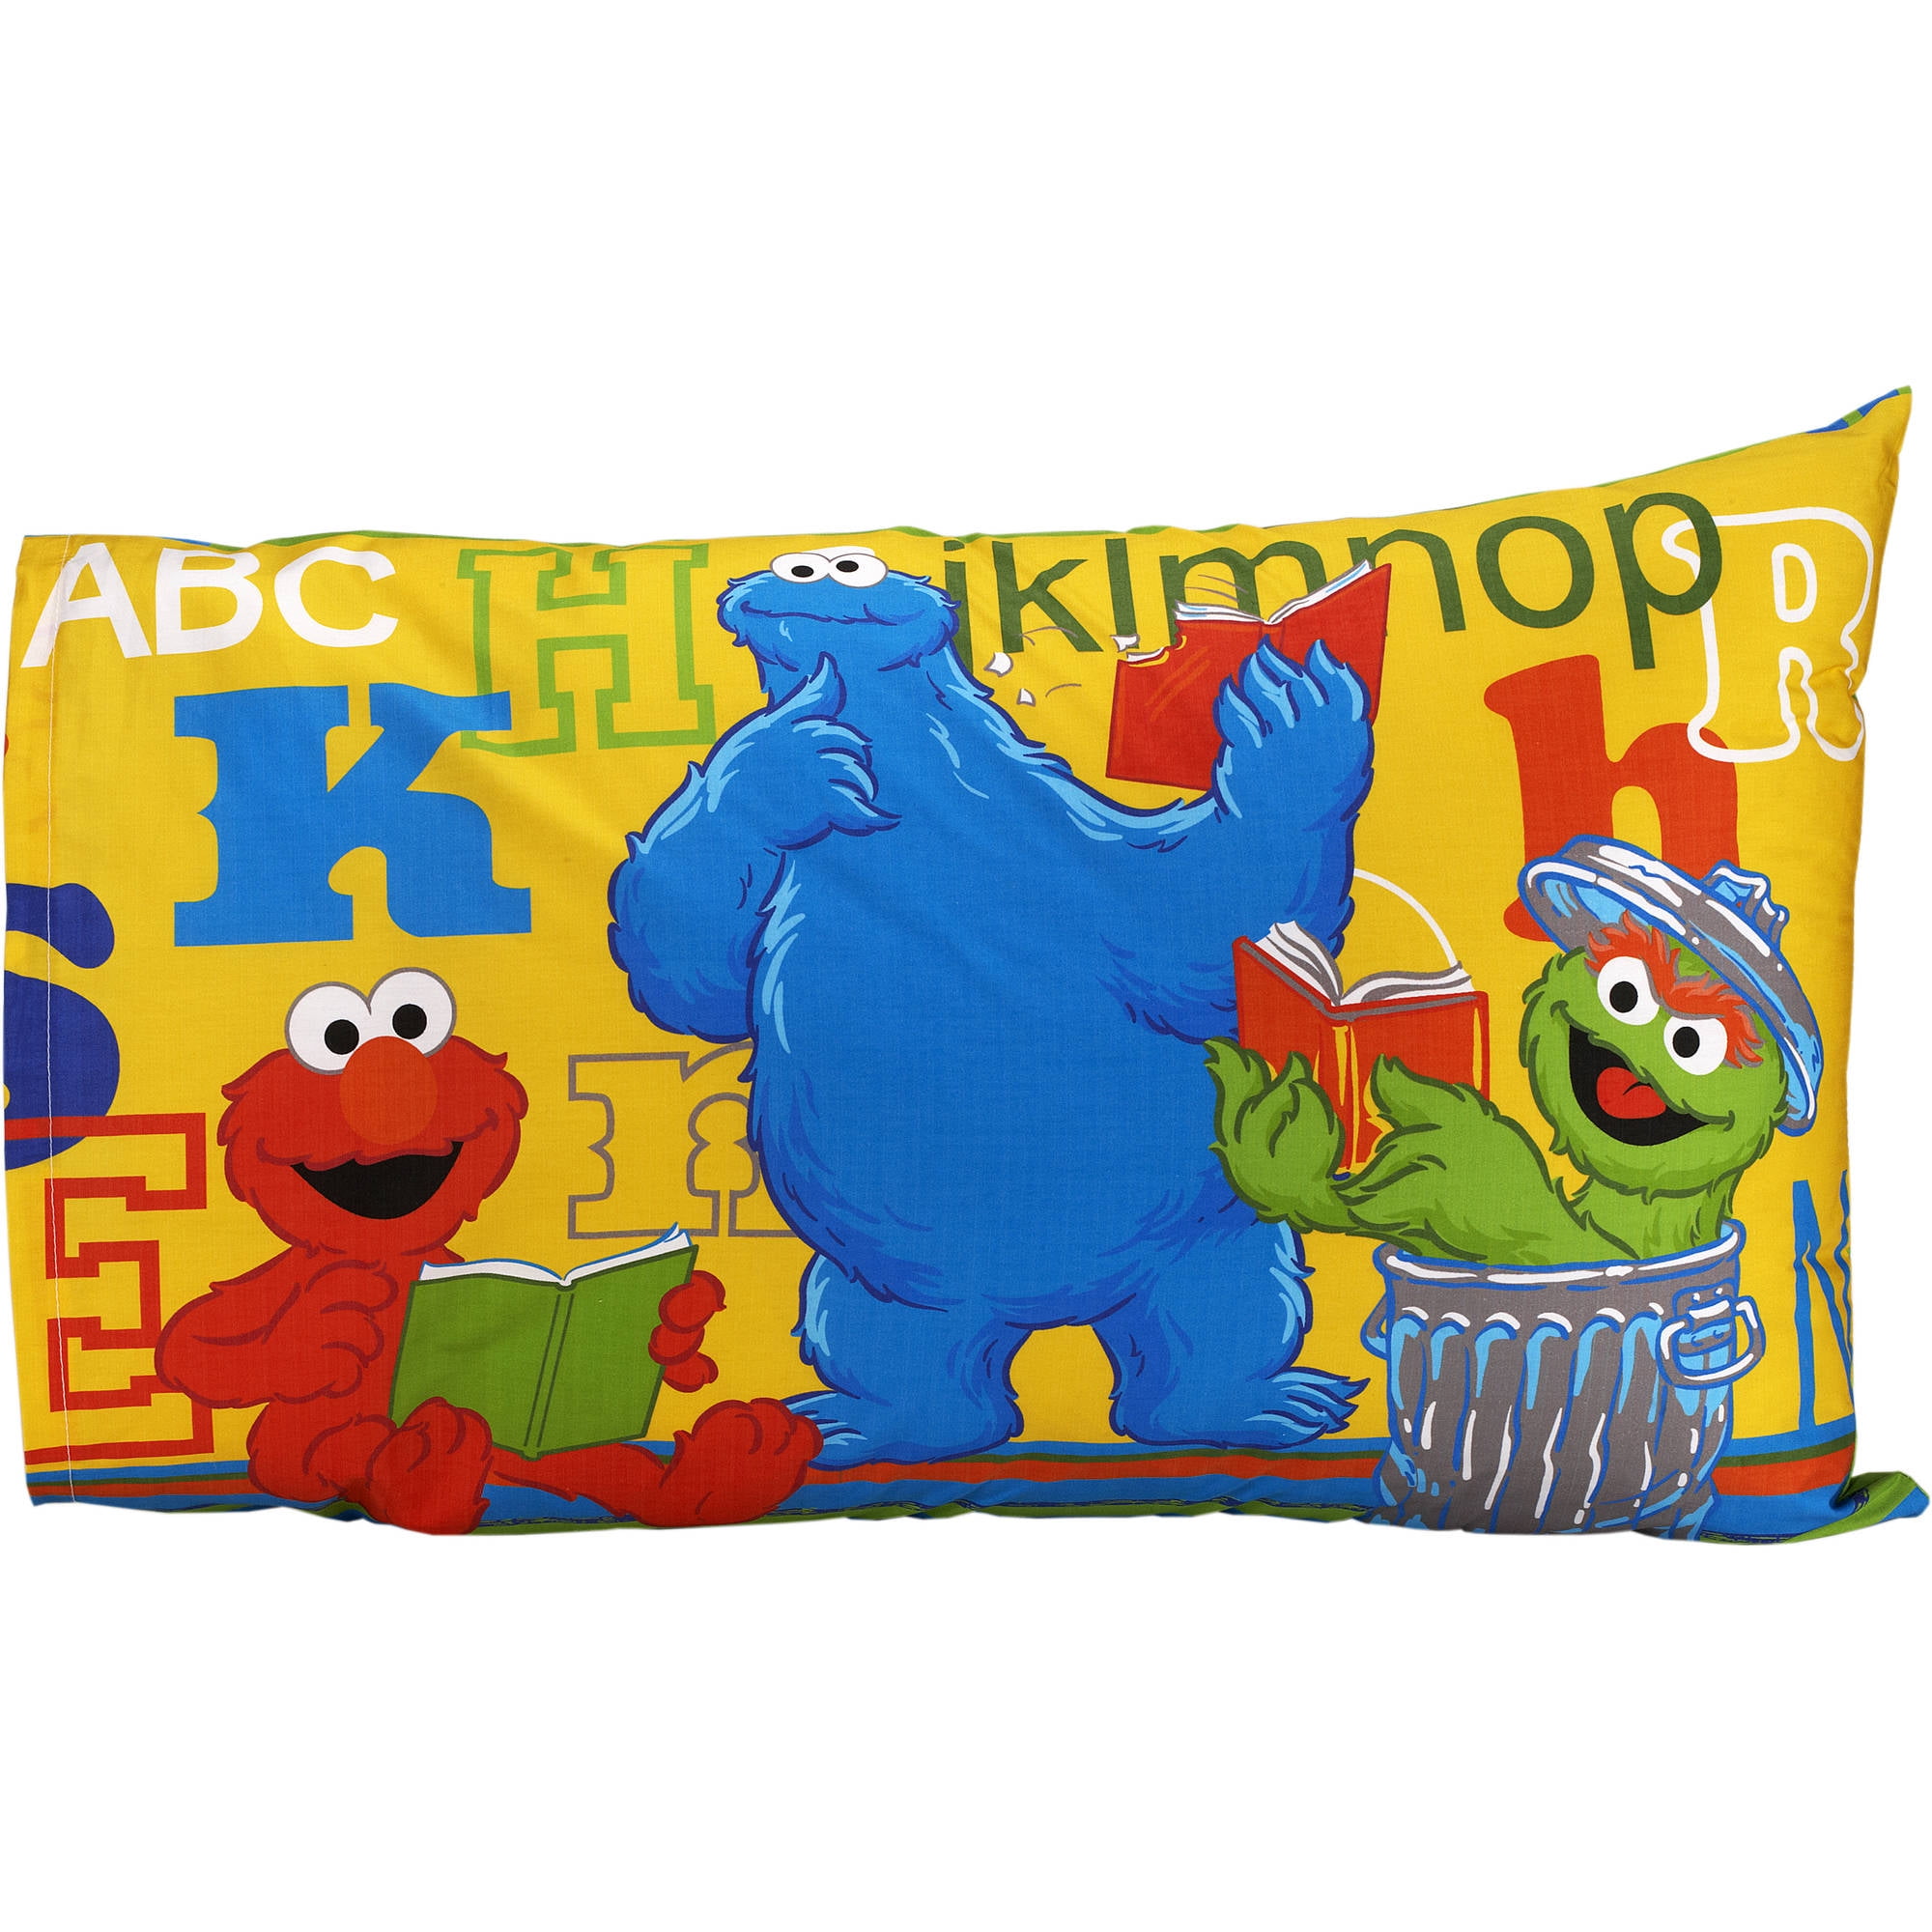 Details about   NEW Sesame Street 4 Piece Full Size Sheet Set with Elmo 2 Pillowcases Microfiber 